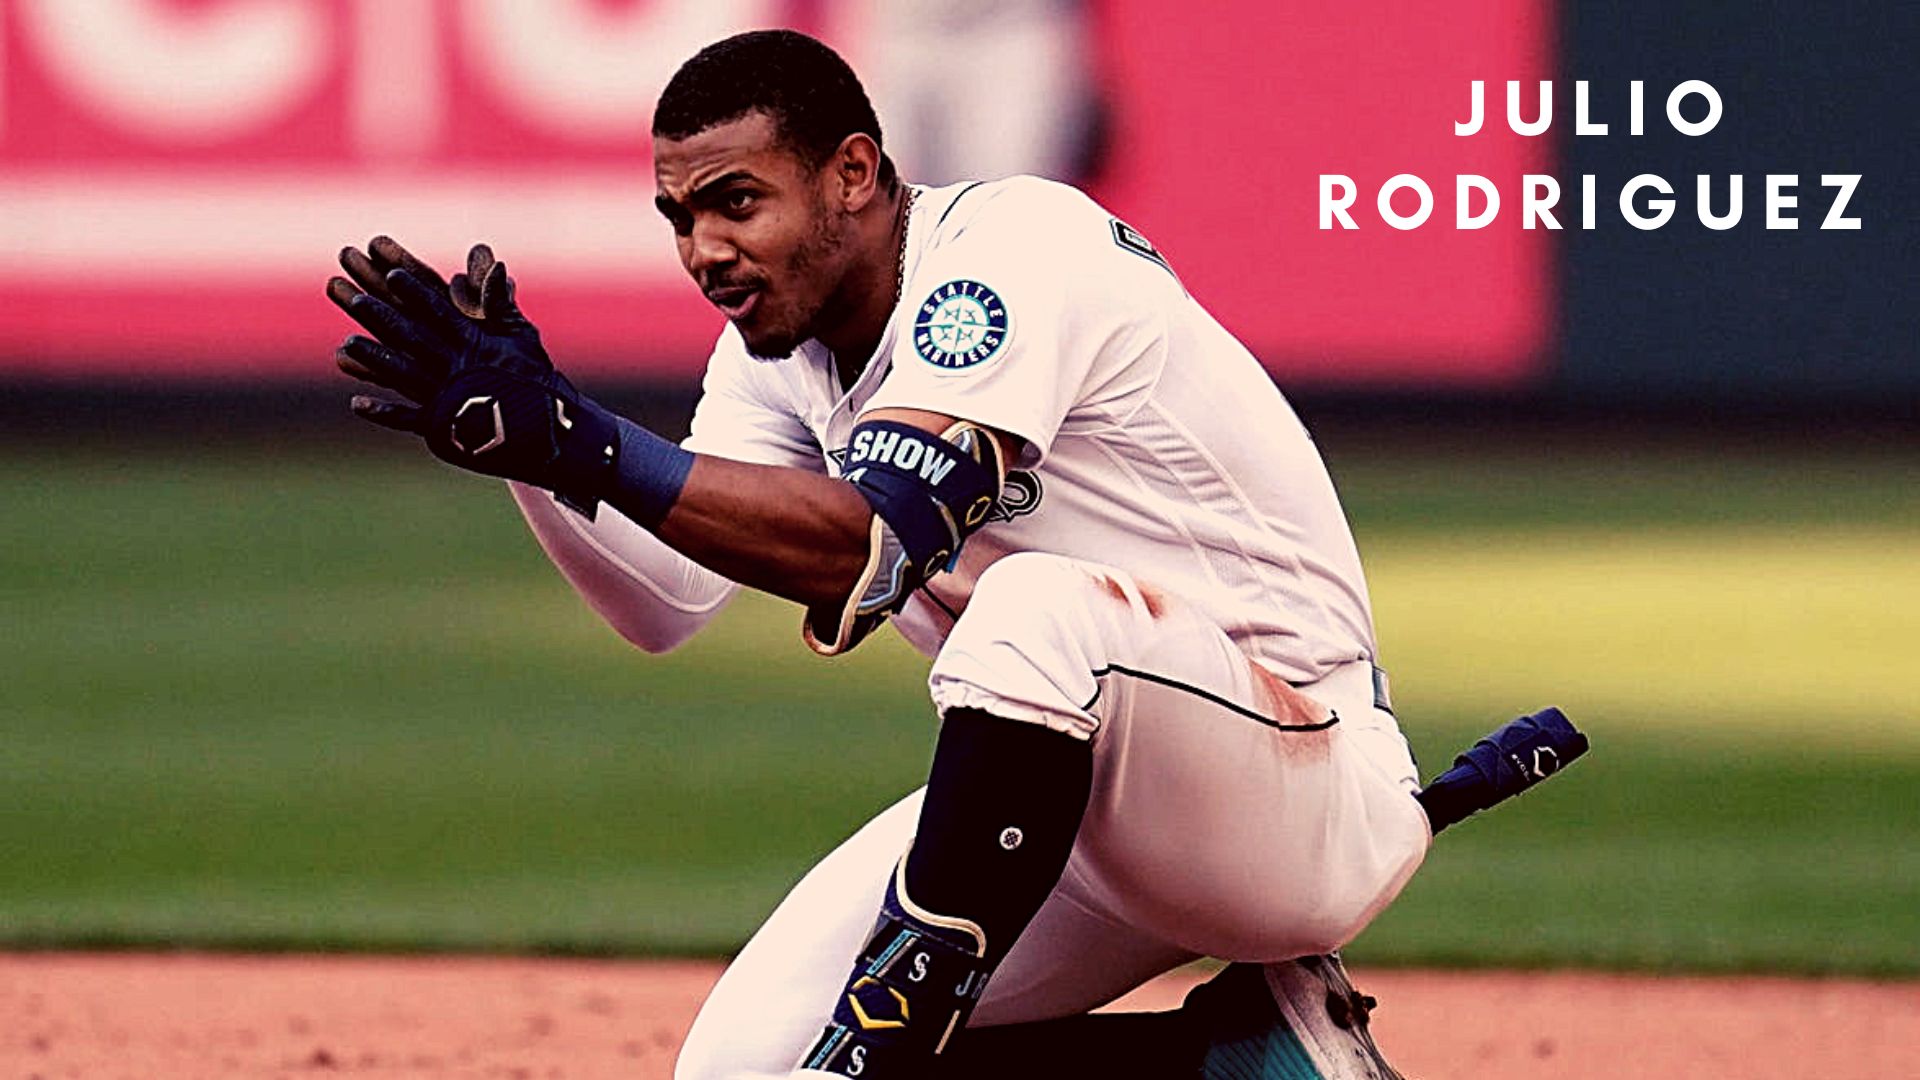 American League's Julio Rodríguez, of the Seattle Mariners, jogs